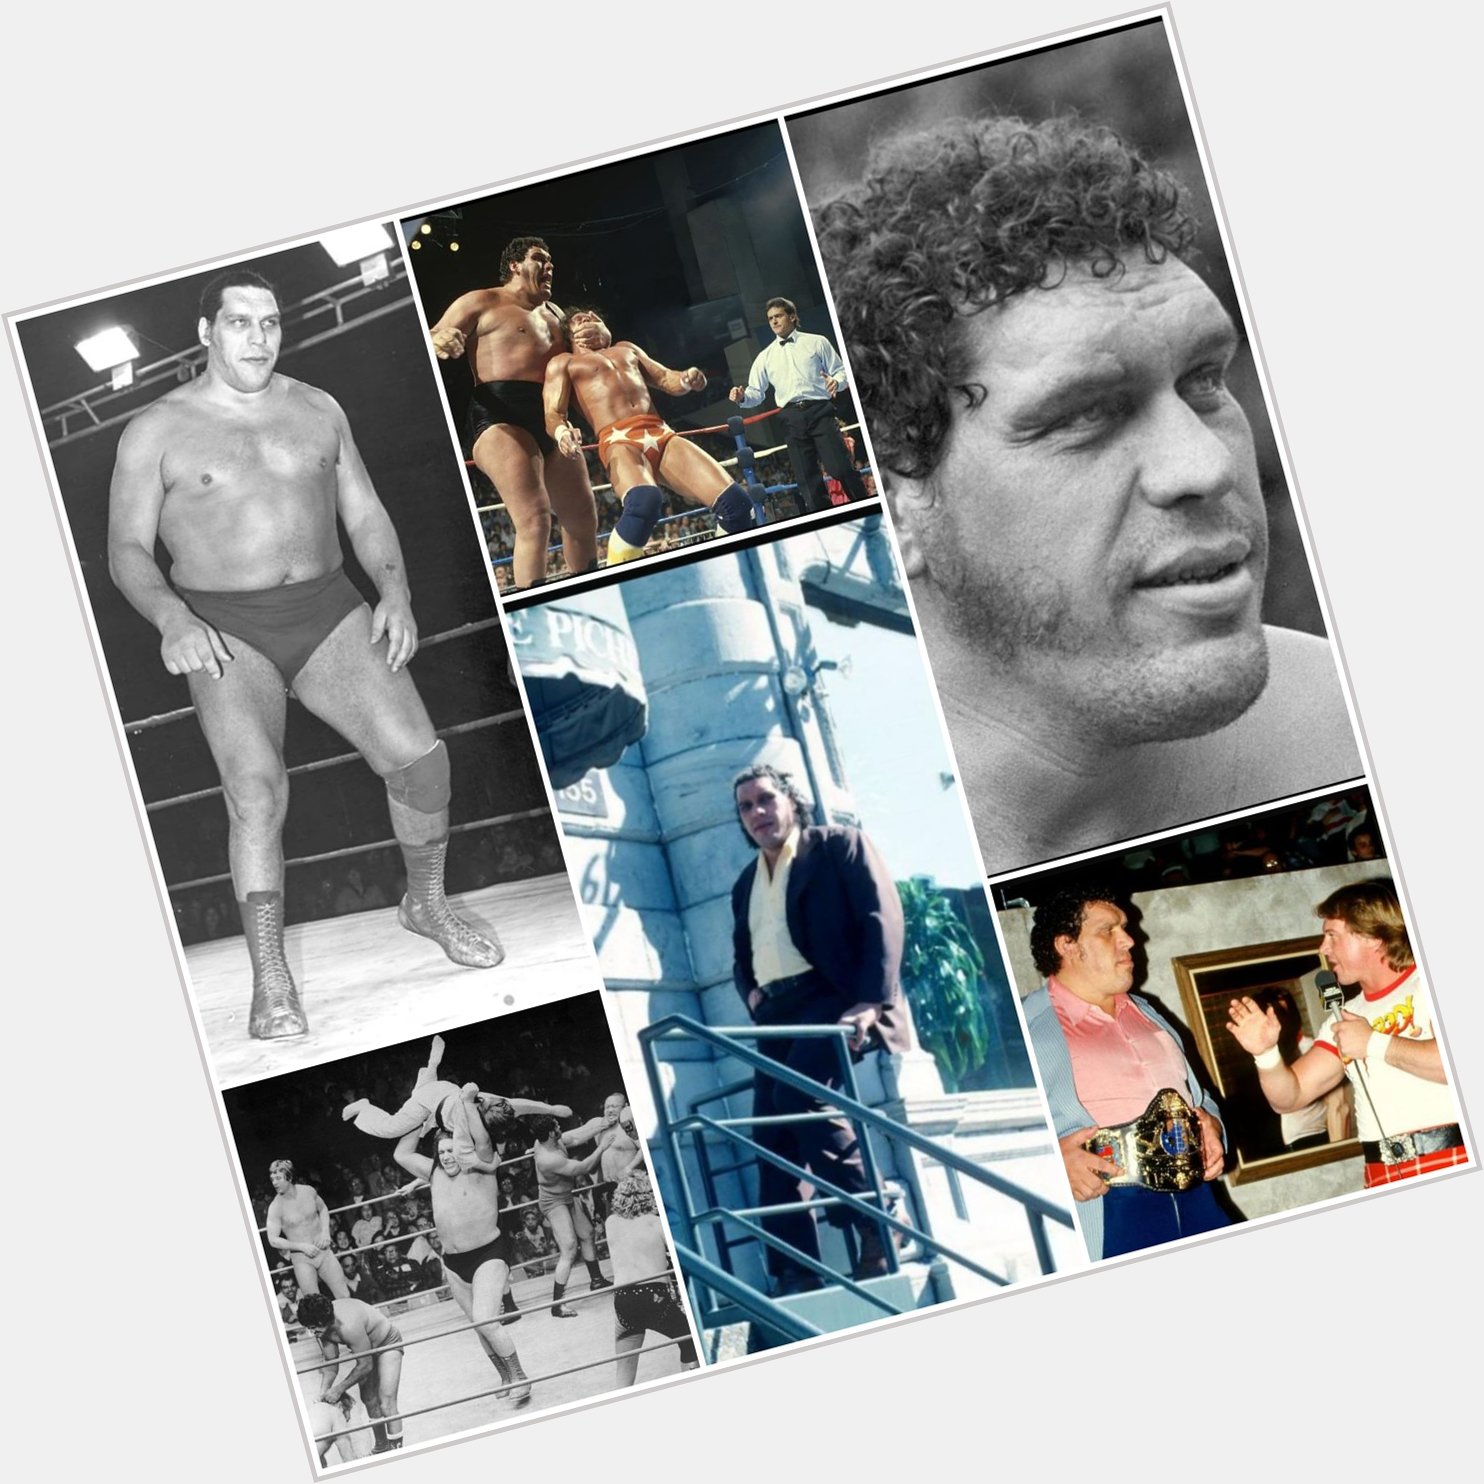 Happy birthday to Andre the Giant, who would have turned 74 today.  